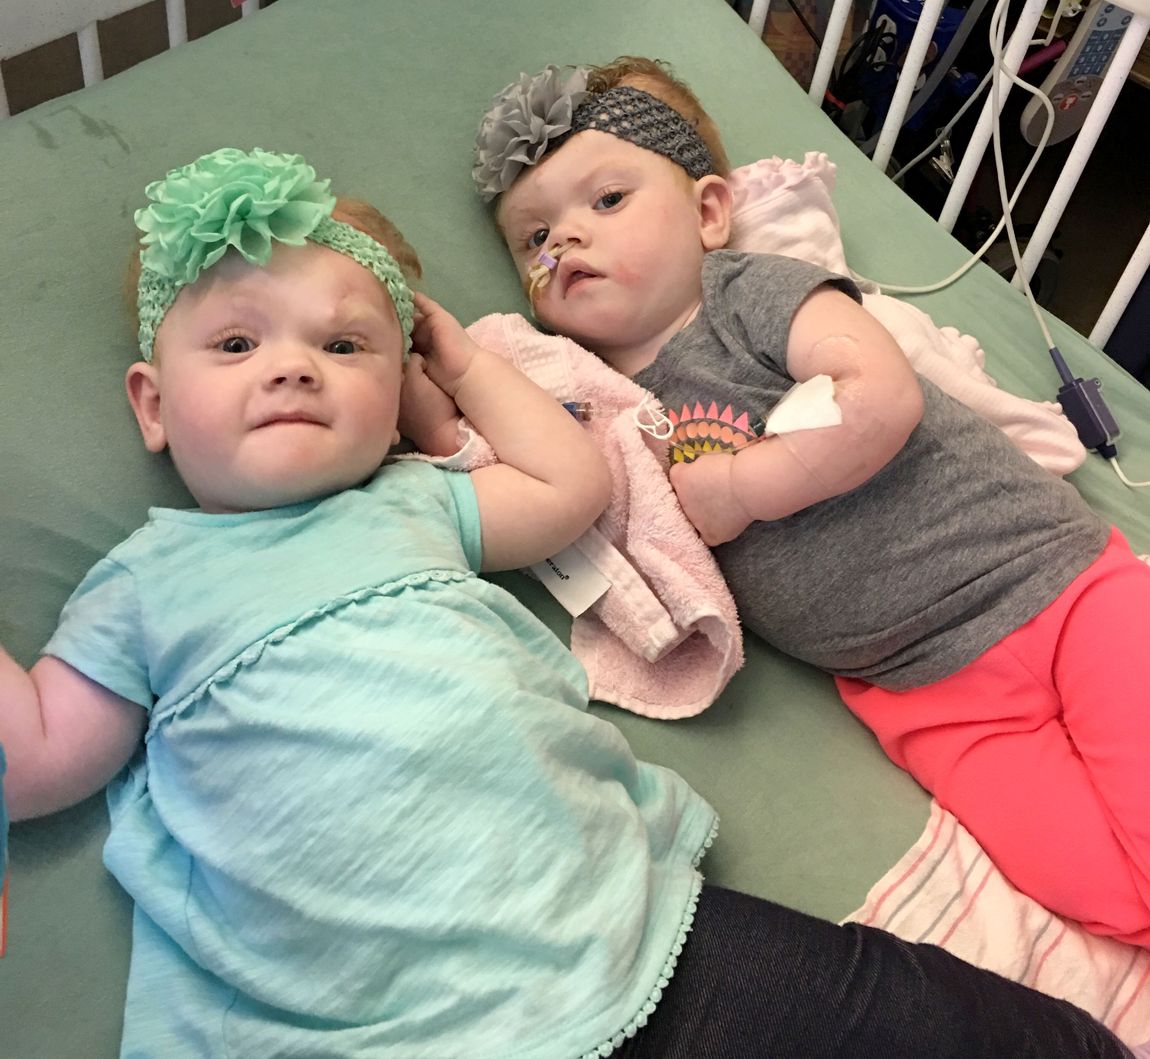 5 Months After Life Changing Surgery, Former Conjoined Twins Are